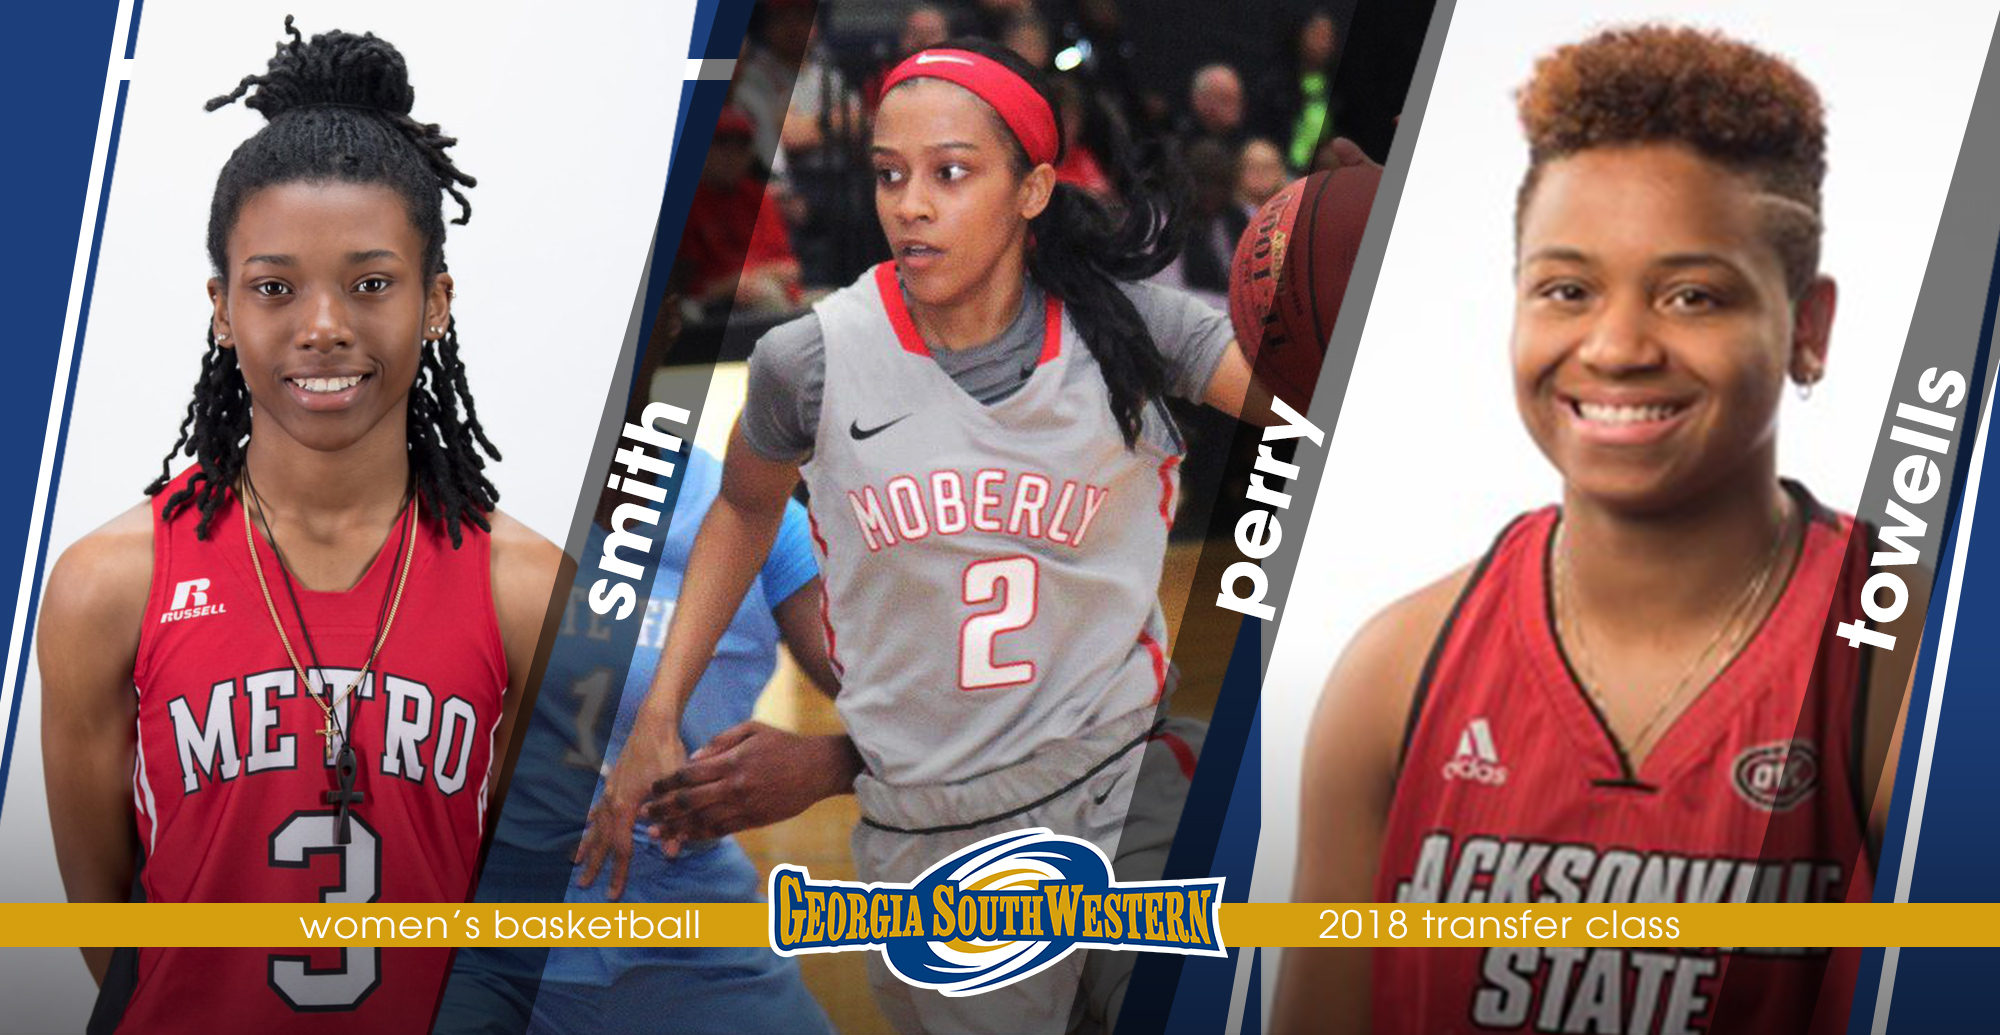 This year's transfer class includes Kayla Smith, Brianna Perry and Morgan Towells.